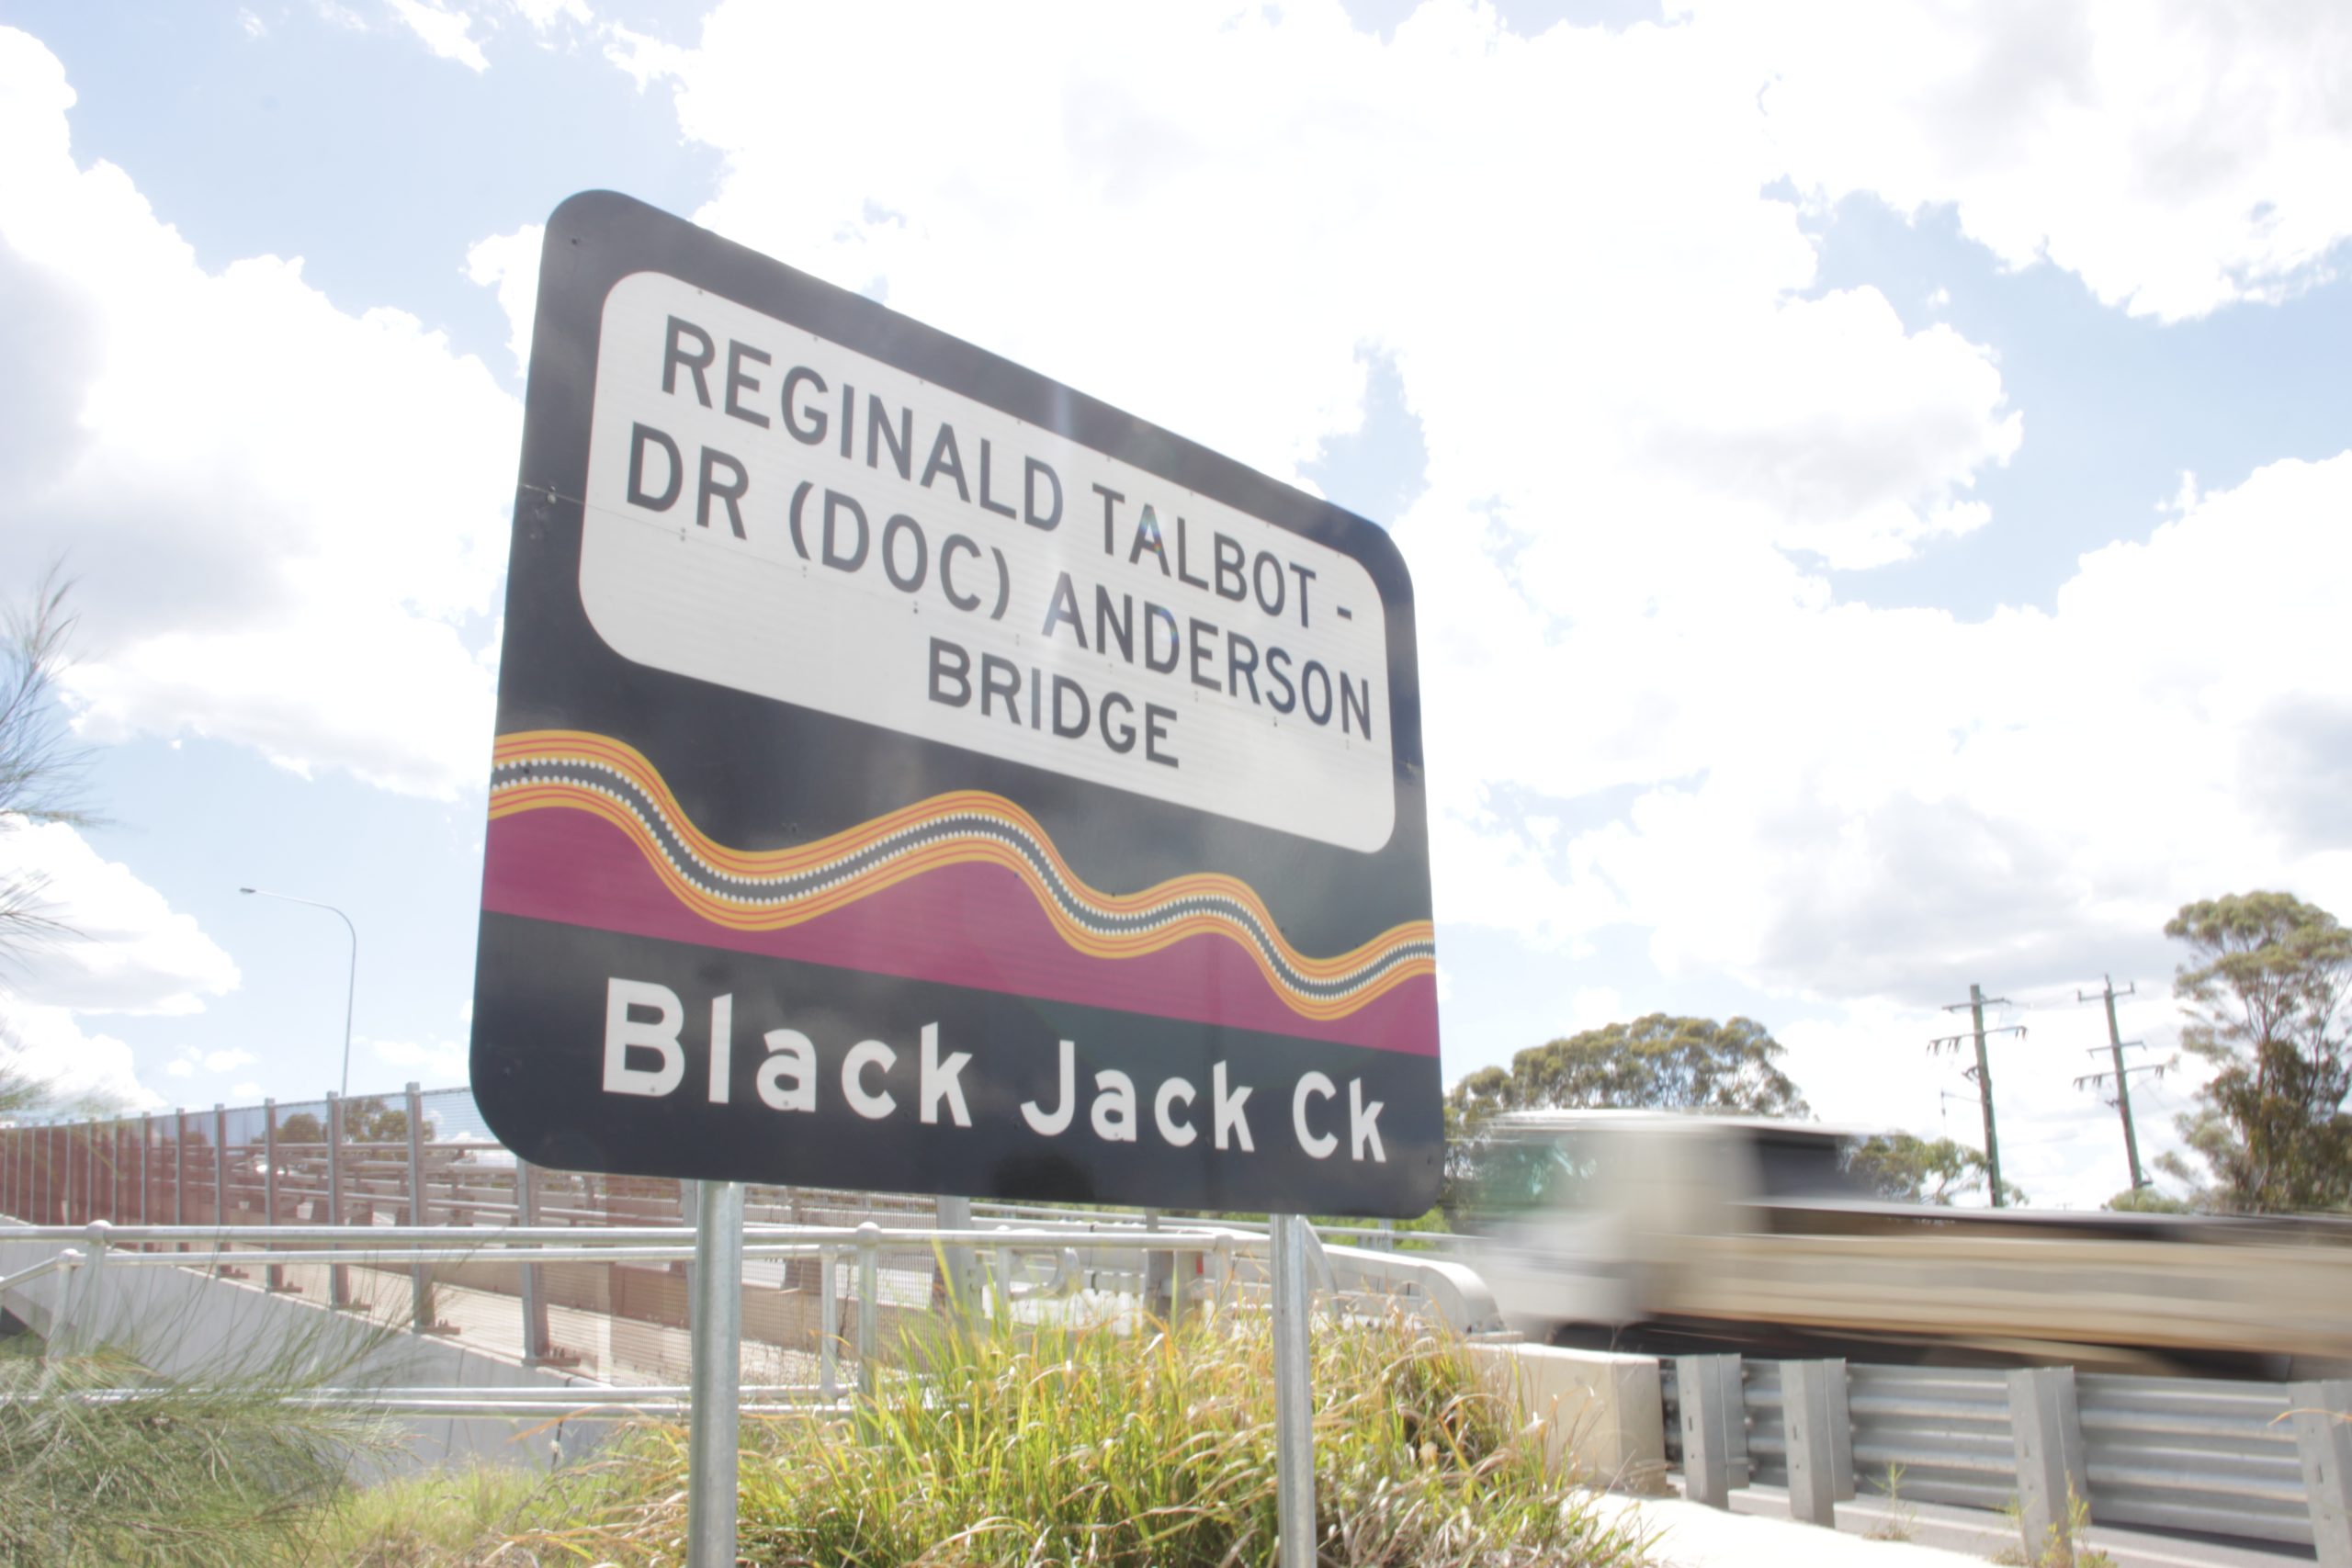 Mixed reaction from community about name and design of new bridge sign